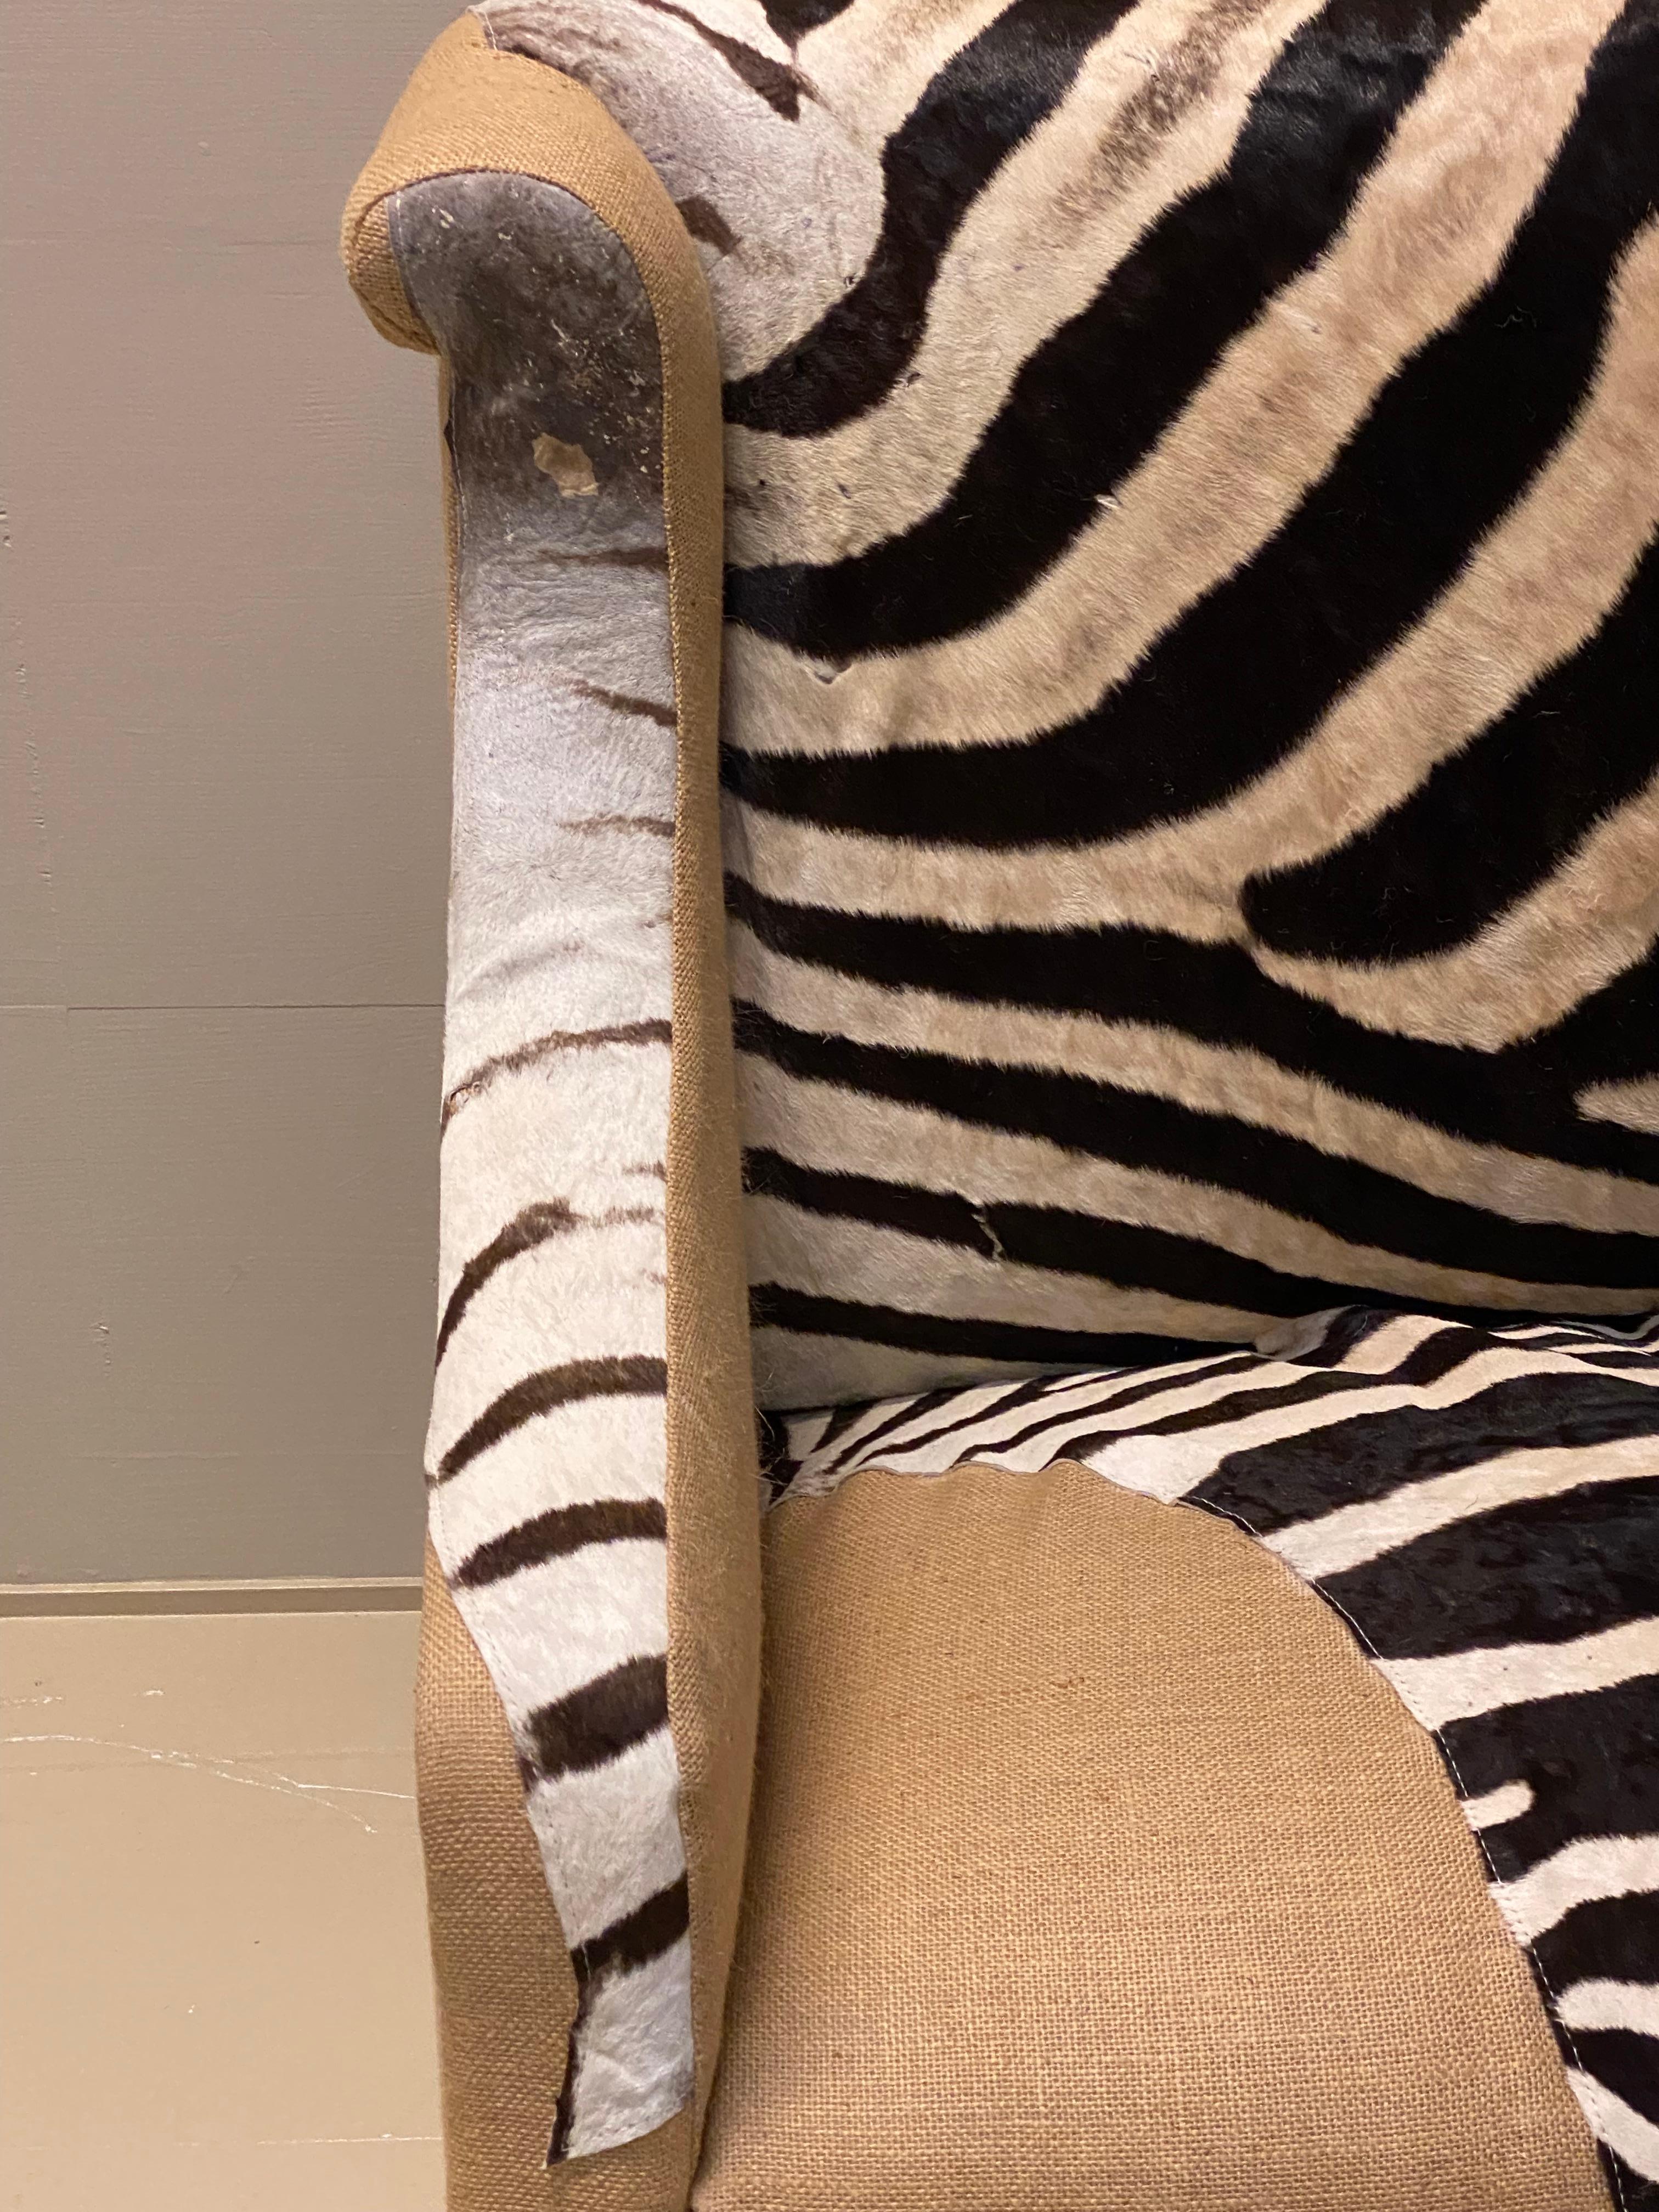 Antique Two Seater Canape with Real Zebra Skin Upholstery In Excellent Condition For Sale In Schellebelle, BE